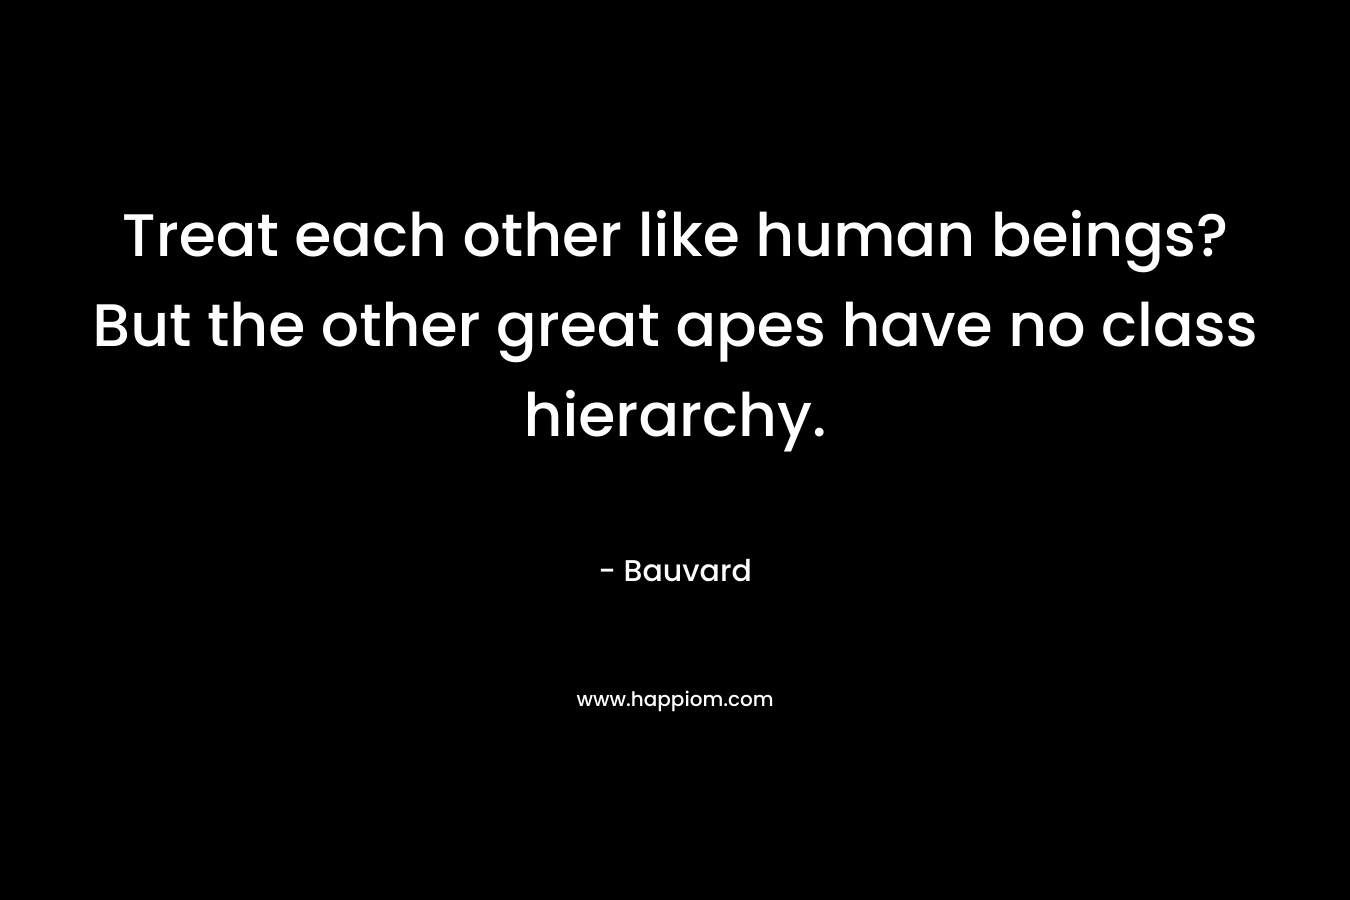 Treat each other like human beings? But the other great apes have no class hierarchy.